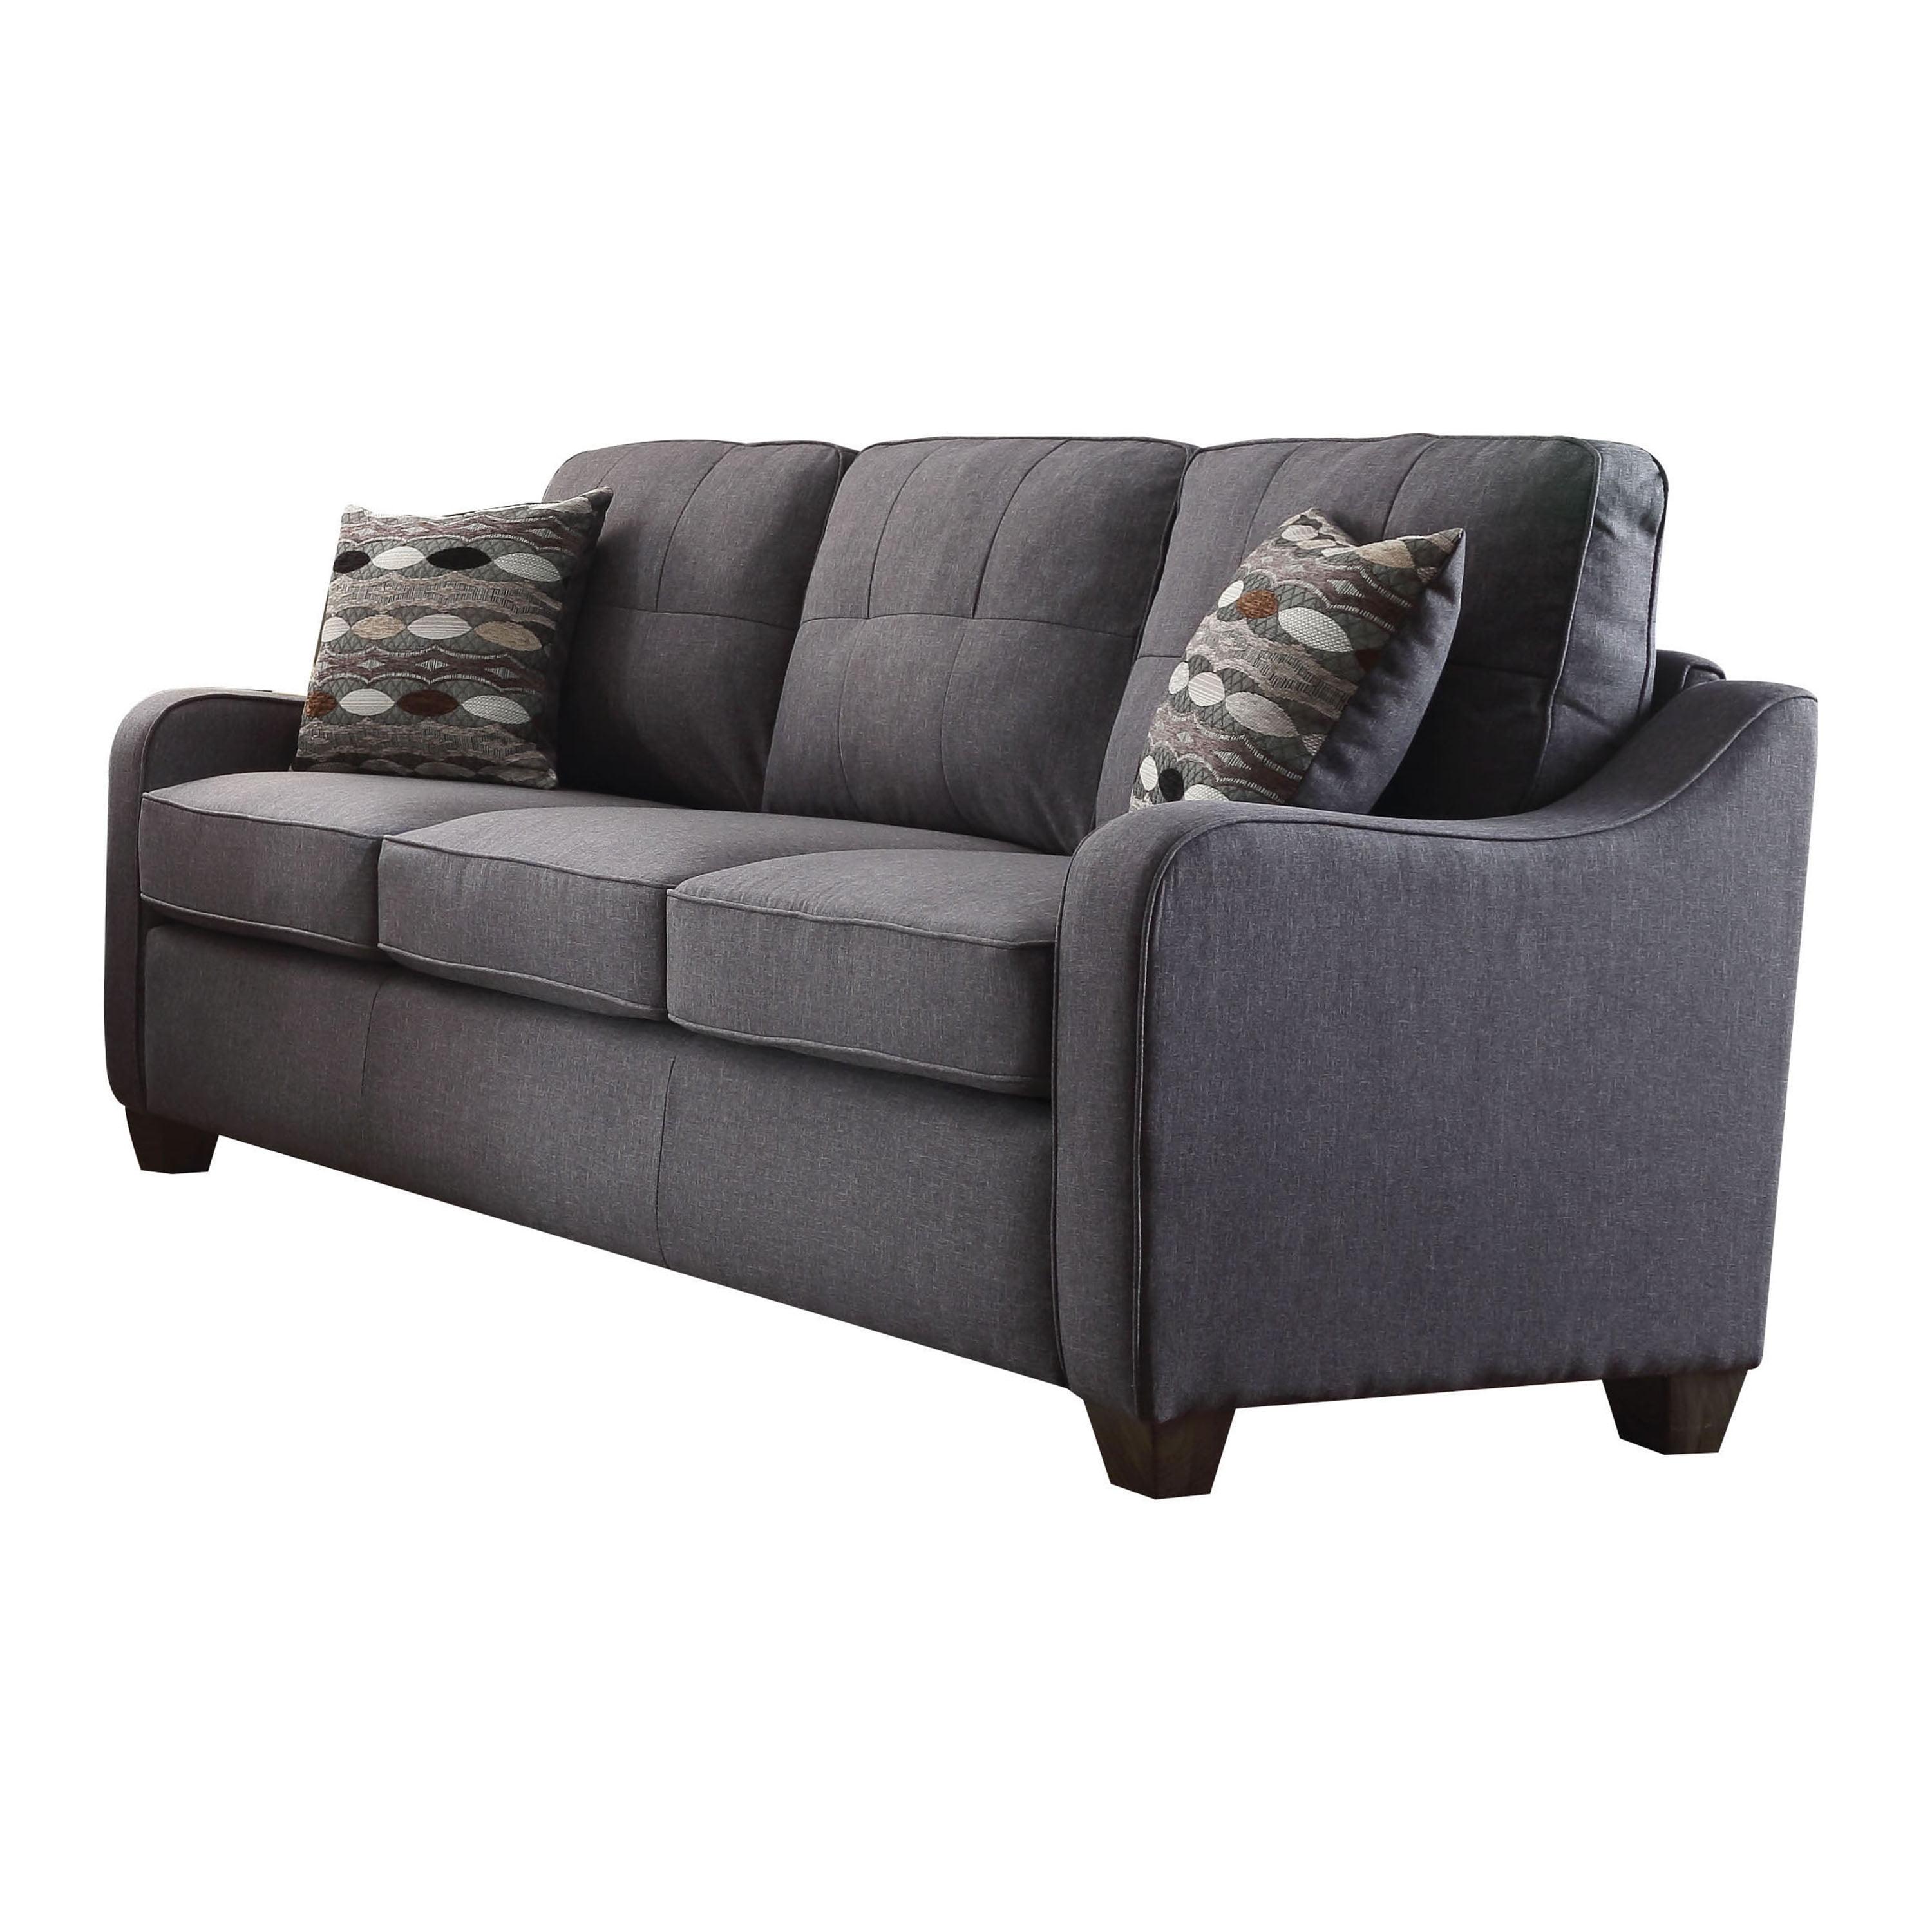 Elegant Gray Linen Tufted Sofa with Removable Cushions and Wood Accents